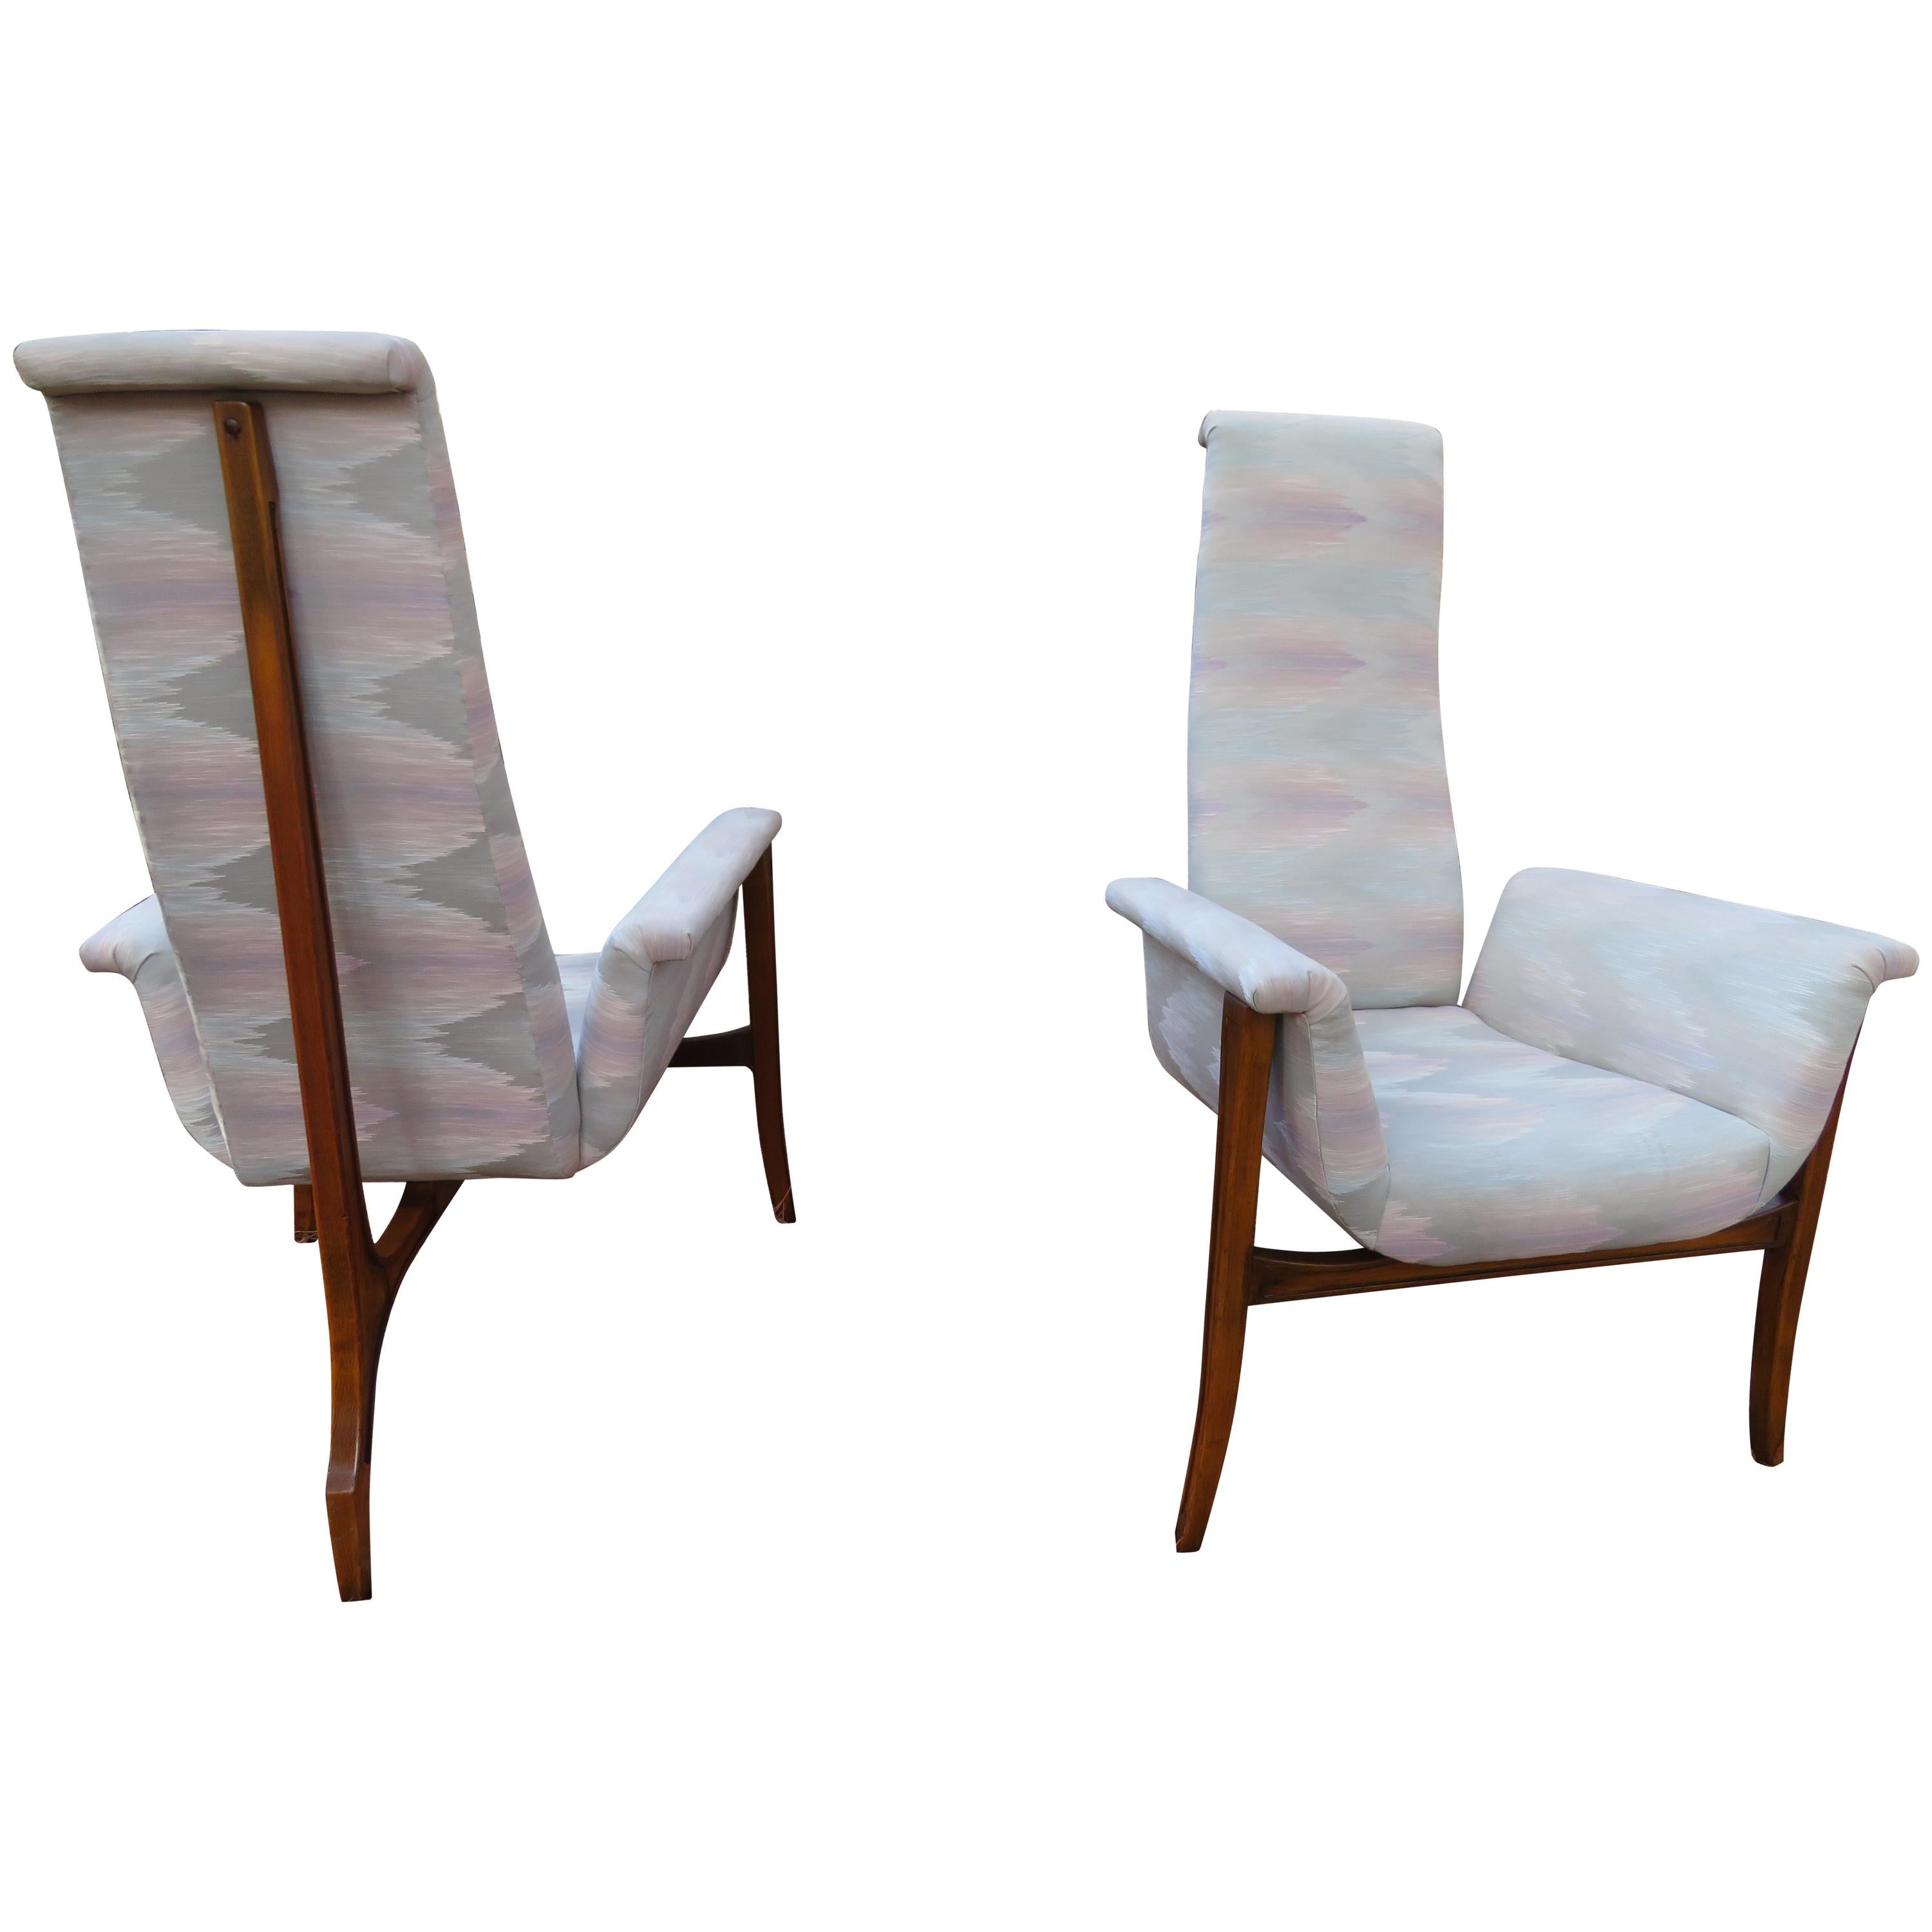 Magnificent Sculptural 3-Leg Lounge Chairs Mid-Century Modern, Pair For Sale